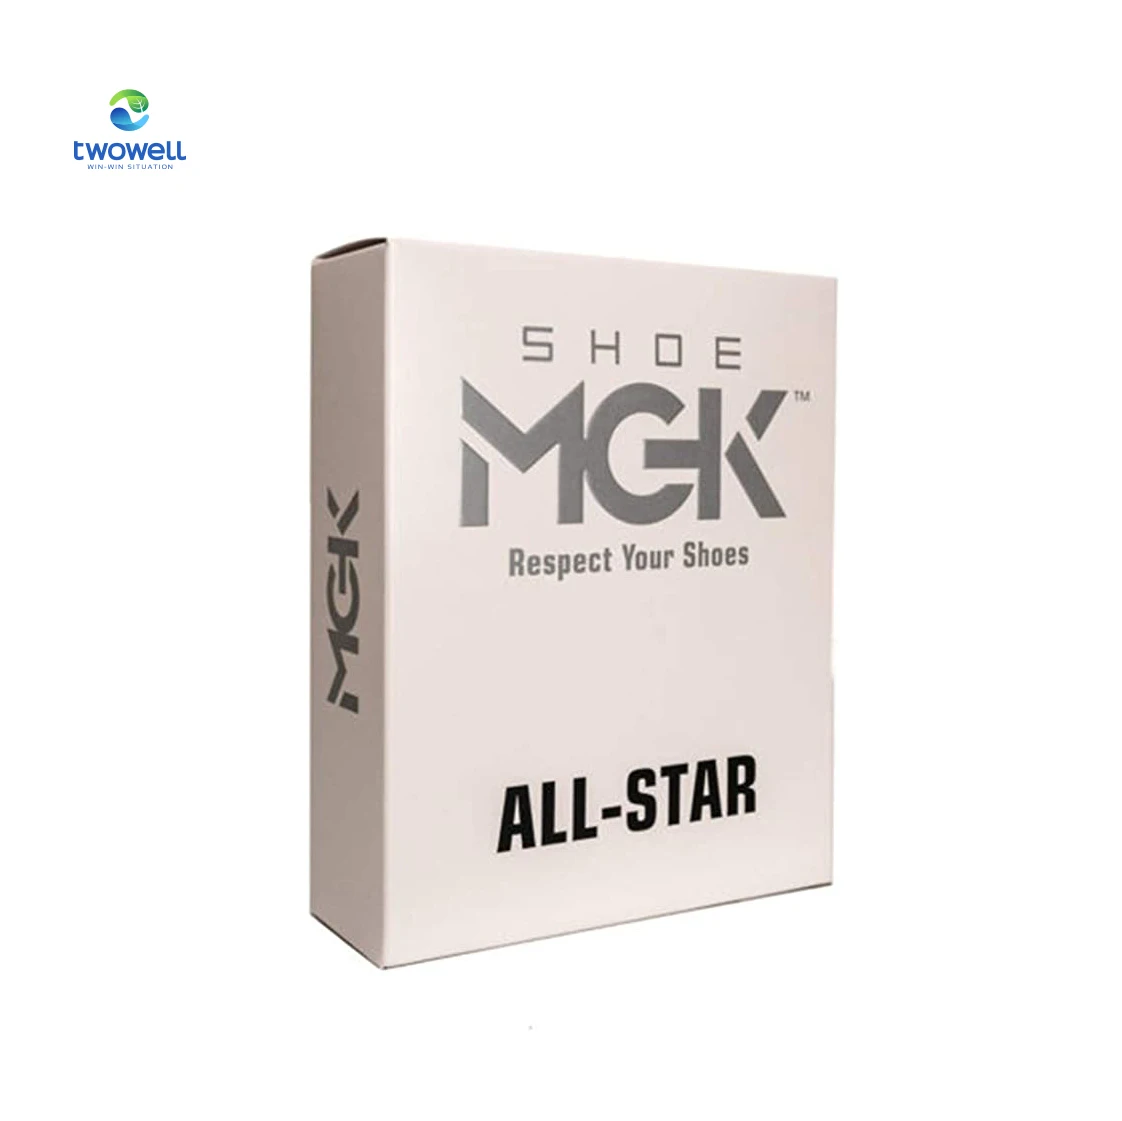 Shoe Mgk All-star Kit With Touch-up White And Sneaker Cleaner And  Conditioner Shoe Cleaning Kit - Buy Shoe Cleaning Kit,Shoe Cleaning Kit Mgk, Shoe Cleaning Kit Sneaker Cleaner Product on 